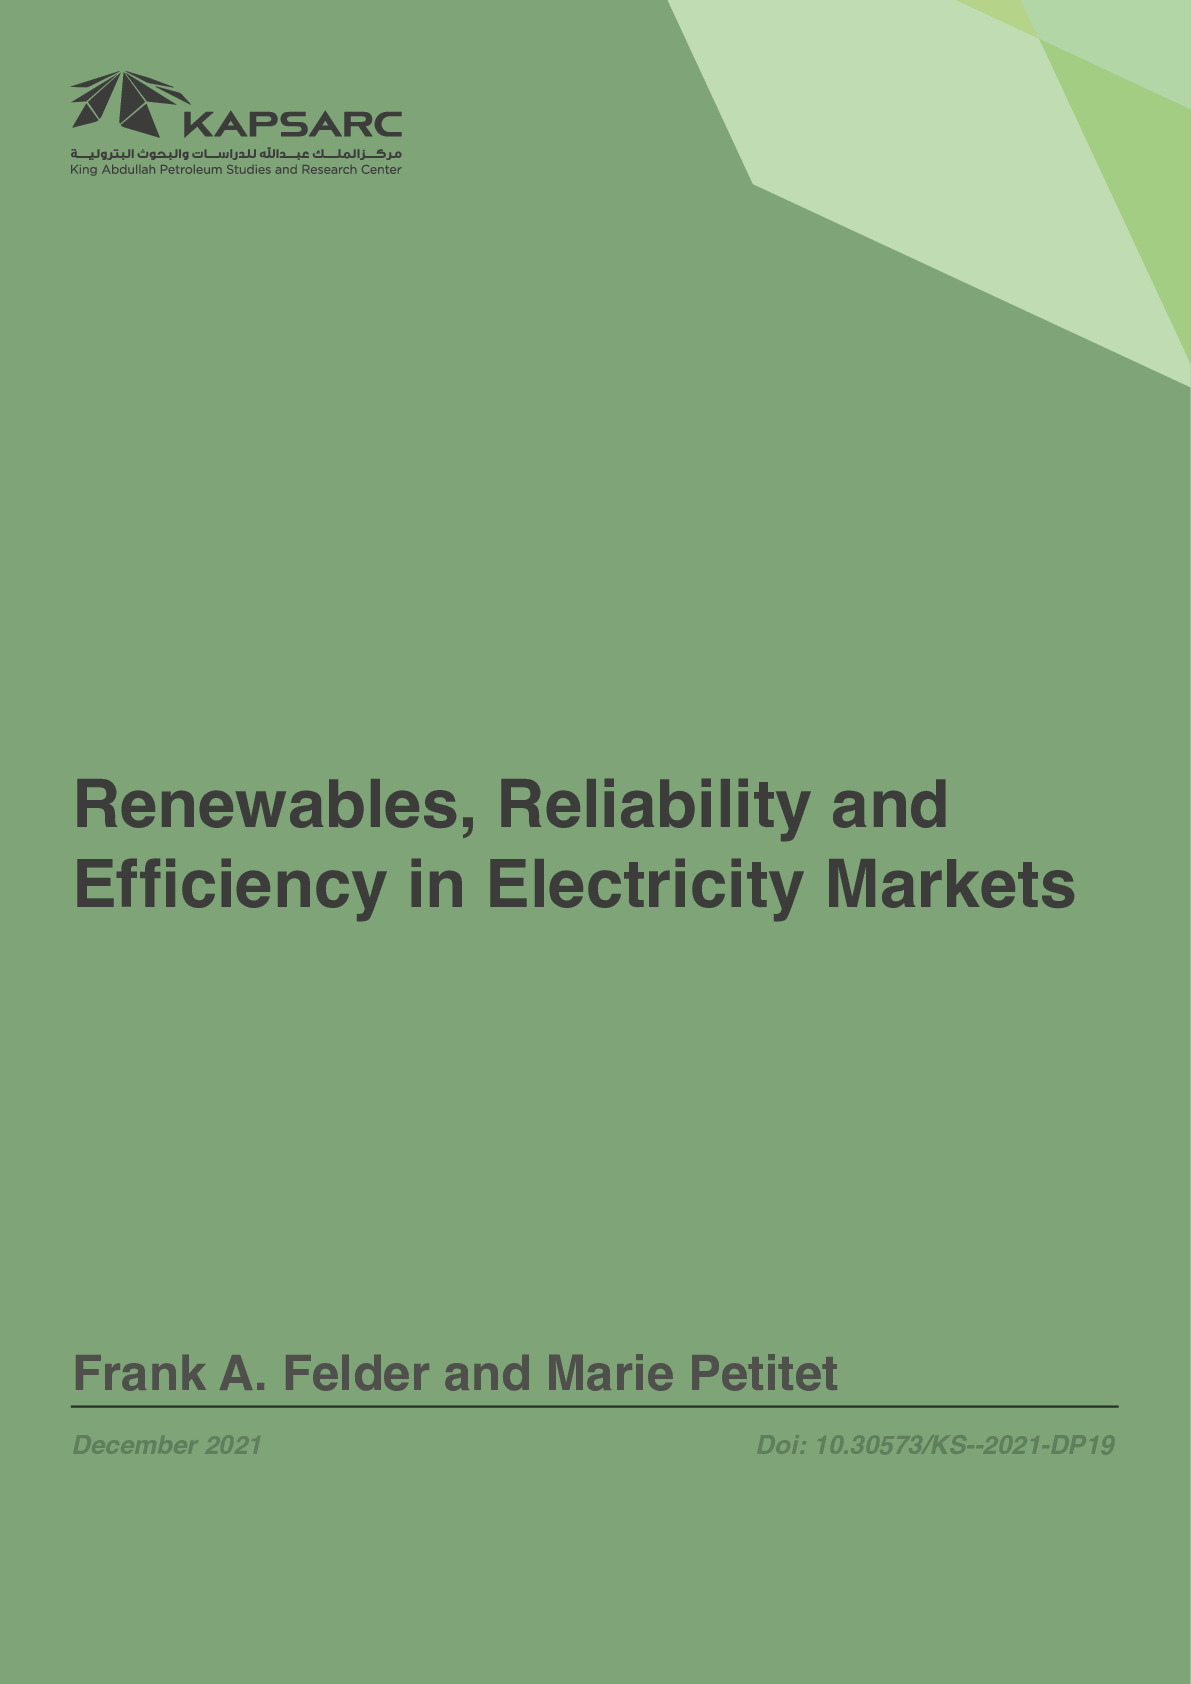 Renewables, Reliability and Efficiency in Electricity Markets